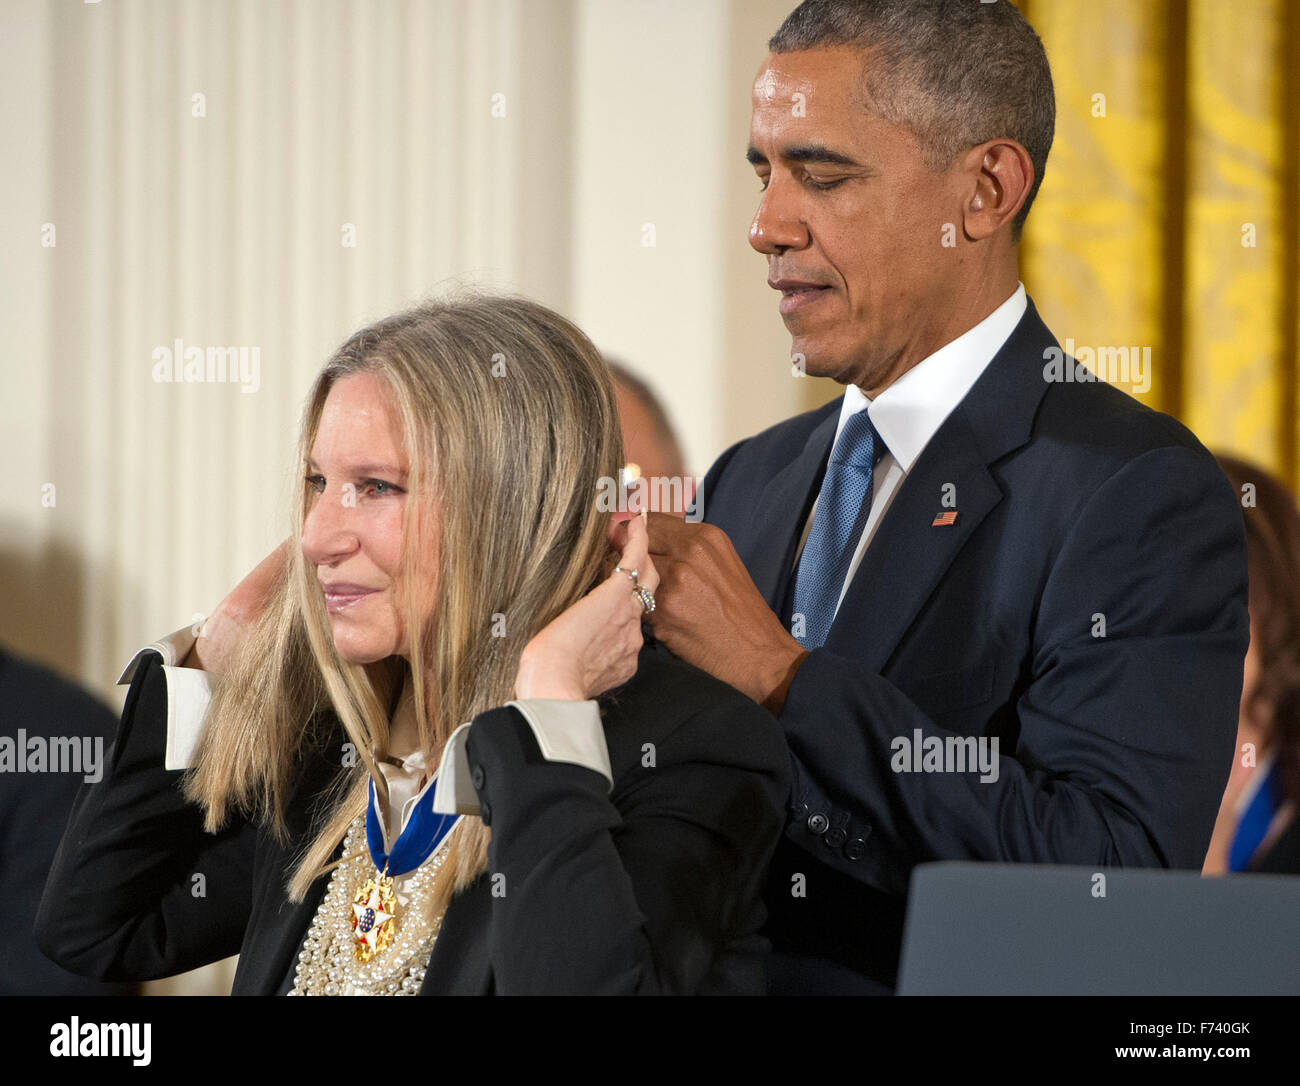 Singer, actor, director and songwriter Barbra Streisand receives the Presidential Medal of Freedom from United States President Barack Obama during a ceremony in the East Room of the White House in Washington, DC on Tuesday, November 24, 2015. The Medal is the highest US civilian honor, presented to individuals who have made especially meritorious contributions to the security or national interests of the US, to world peace, or to cultural or significant public or private endeavors. Photo: Ron Sachs/CNP/dpa - NO WIRE SERVICE - Stock Photo